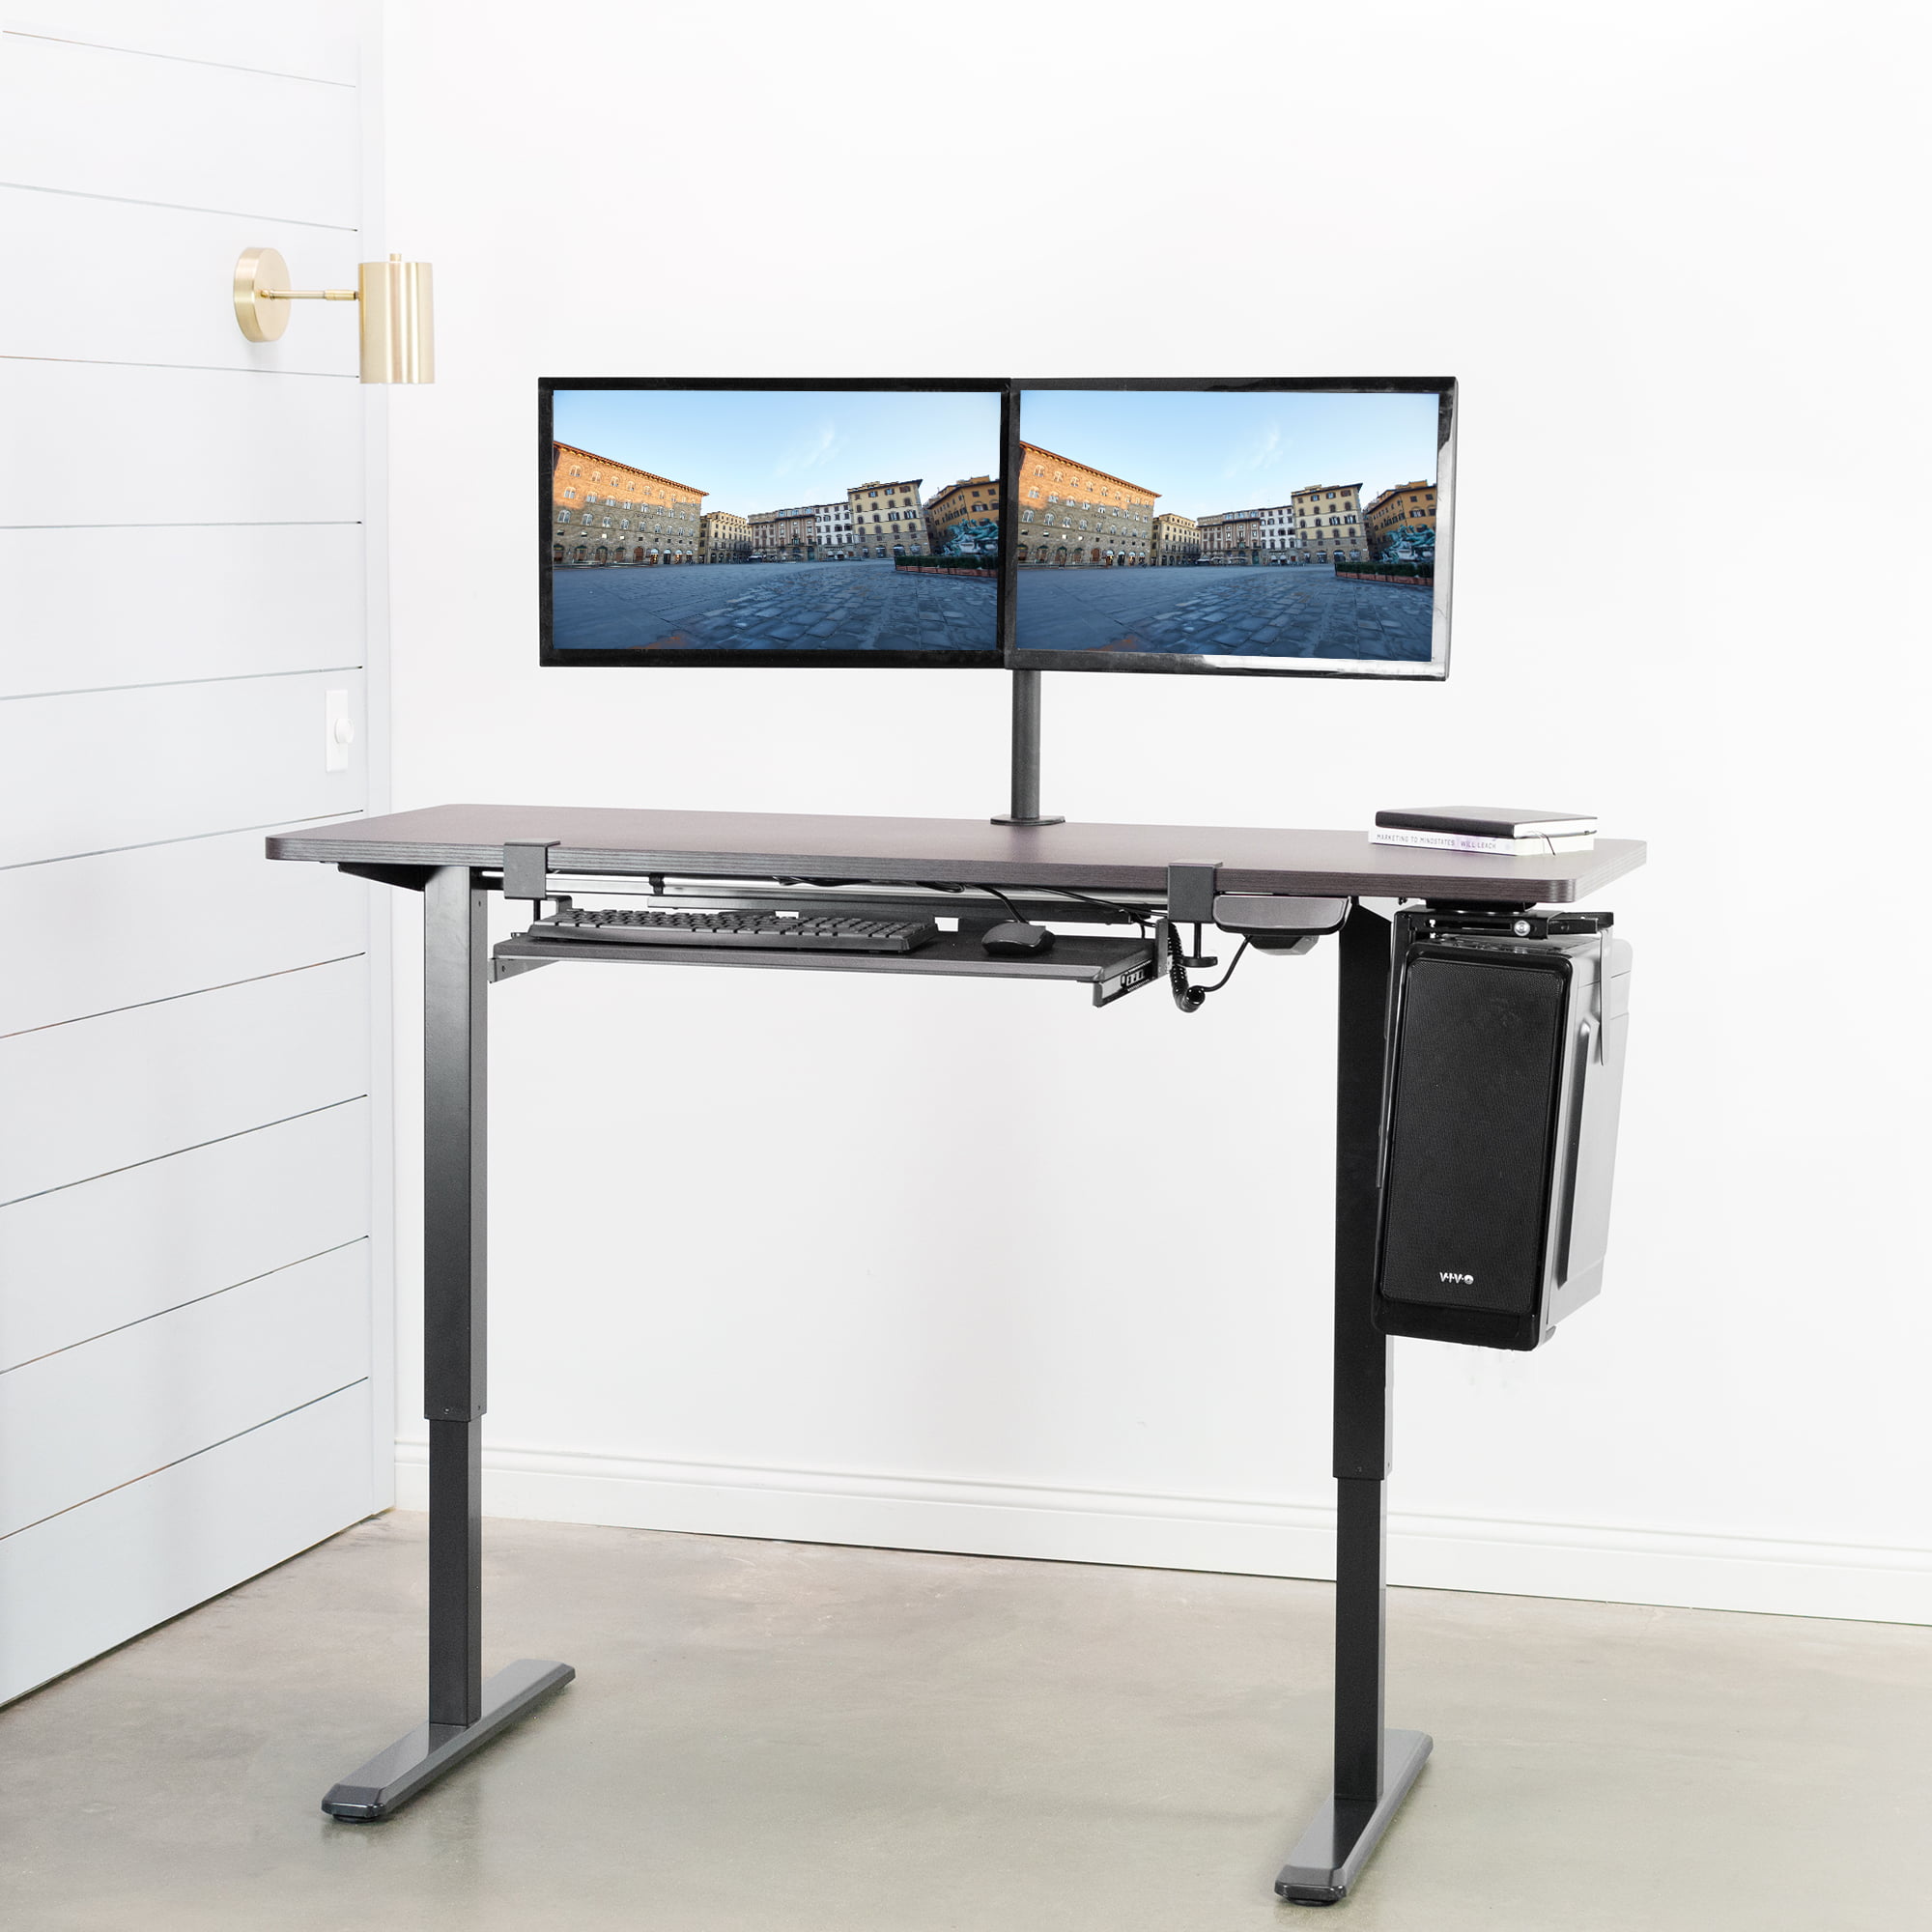 USED VIVO Espresso Wood 60 x 24 in Universal Table Top for Sit Stand Desk Frames 